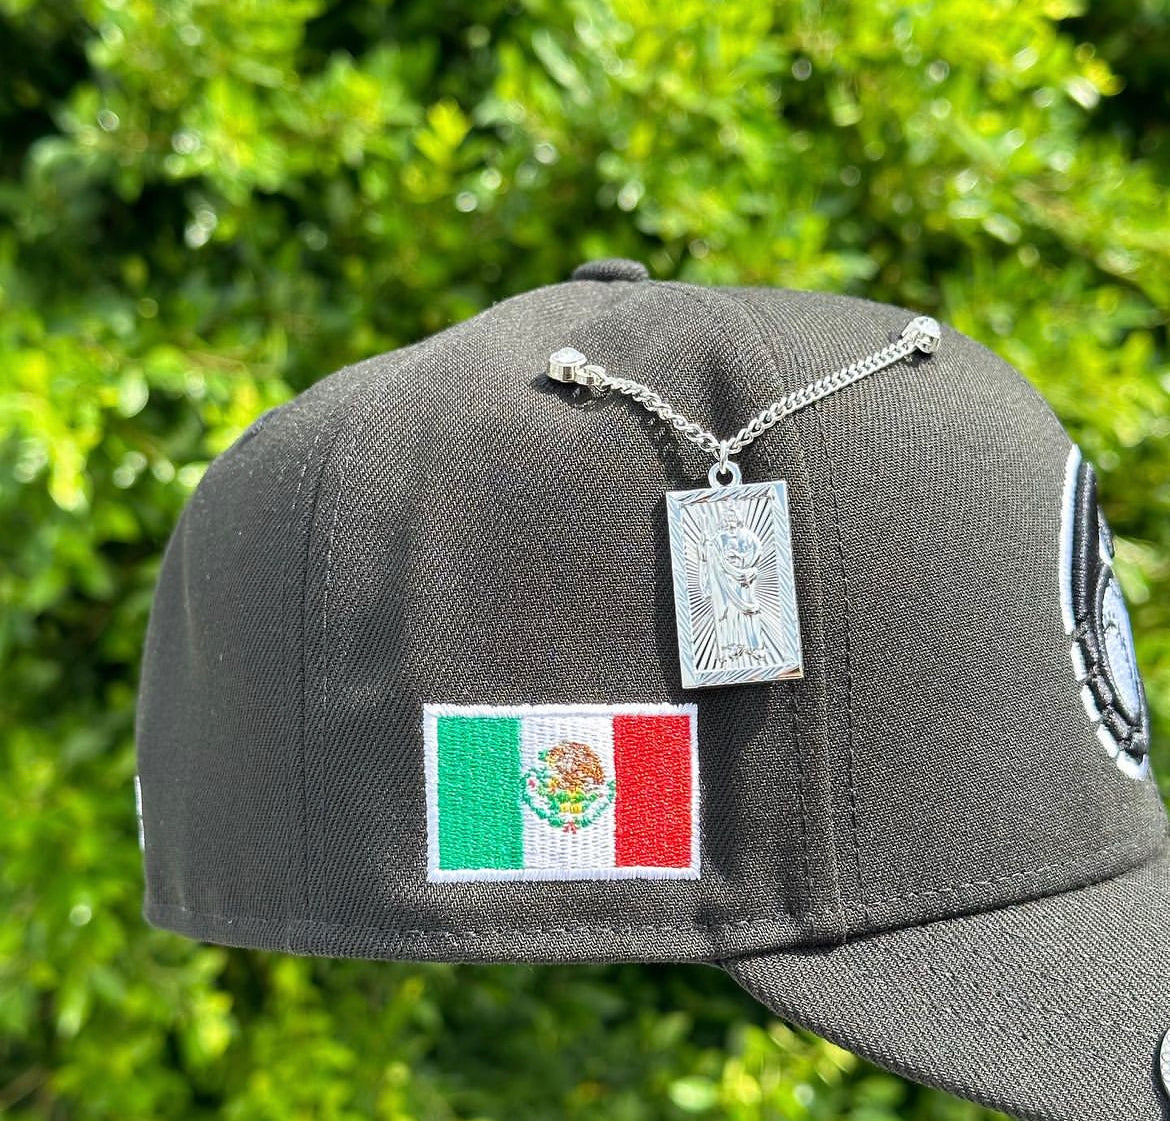 Chrome and dark Green Mexico New Era Fitted Hat – BeisbolMXShop